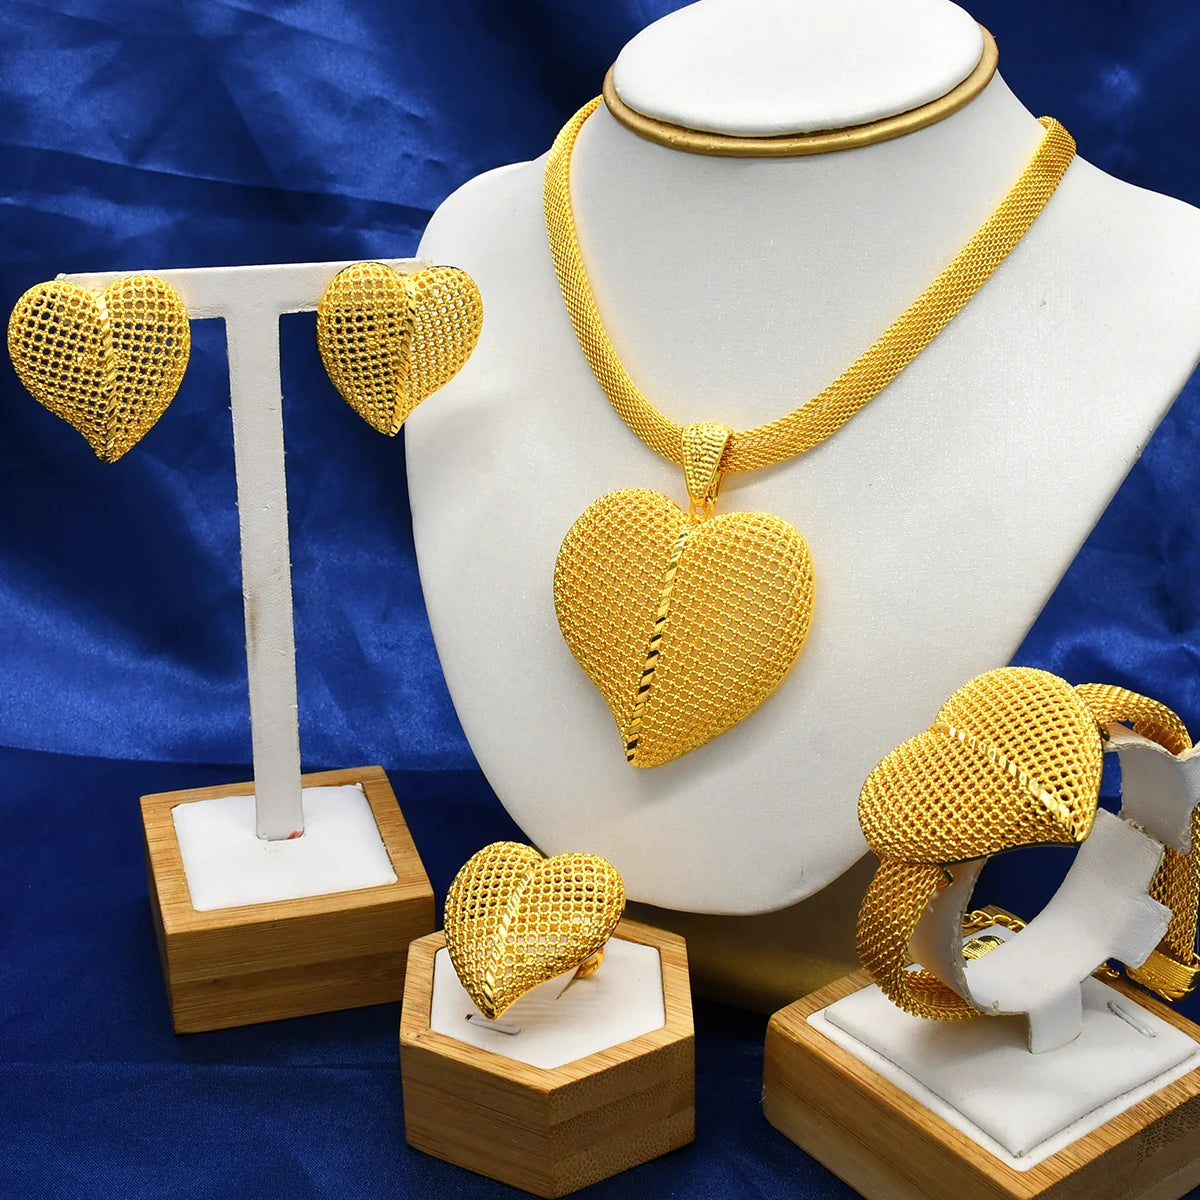 ANIID Indian Luxury Heart Necklace And Earrings Sets For Women Gifts Ethiopian Bridal 24k Gold Plated Copper Jewelry Set Wedding - Hiron Store